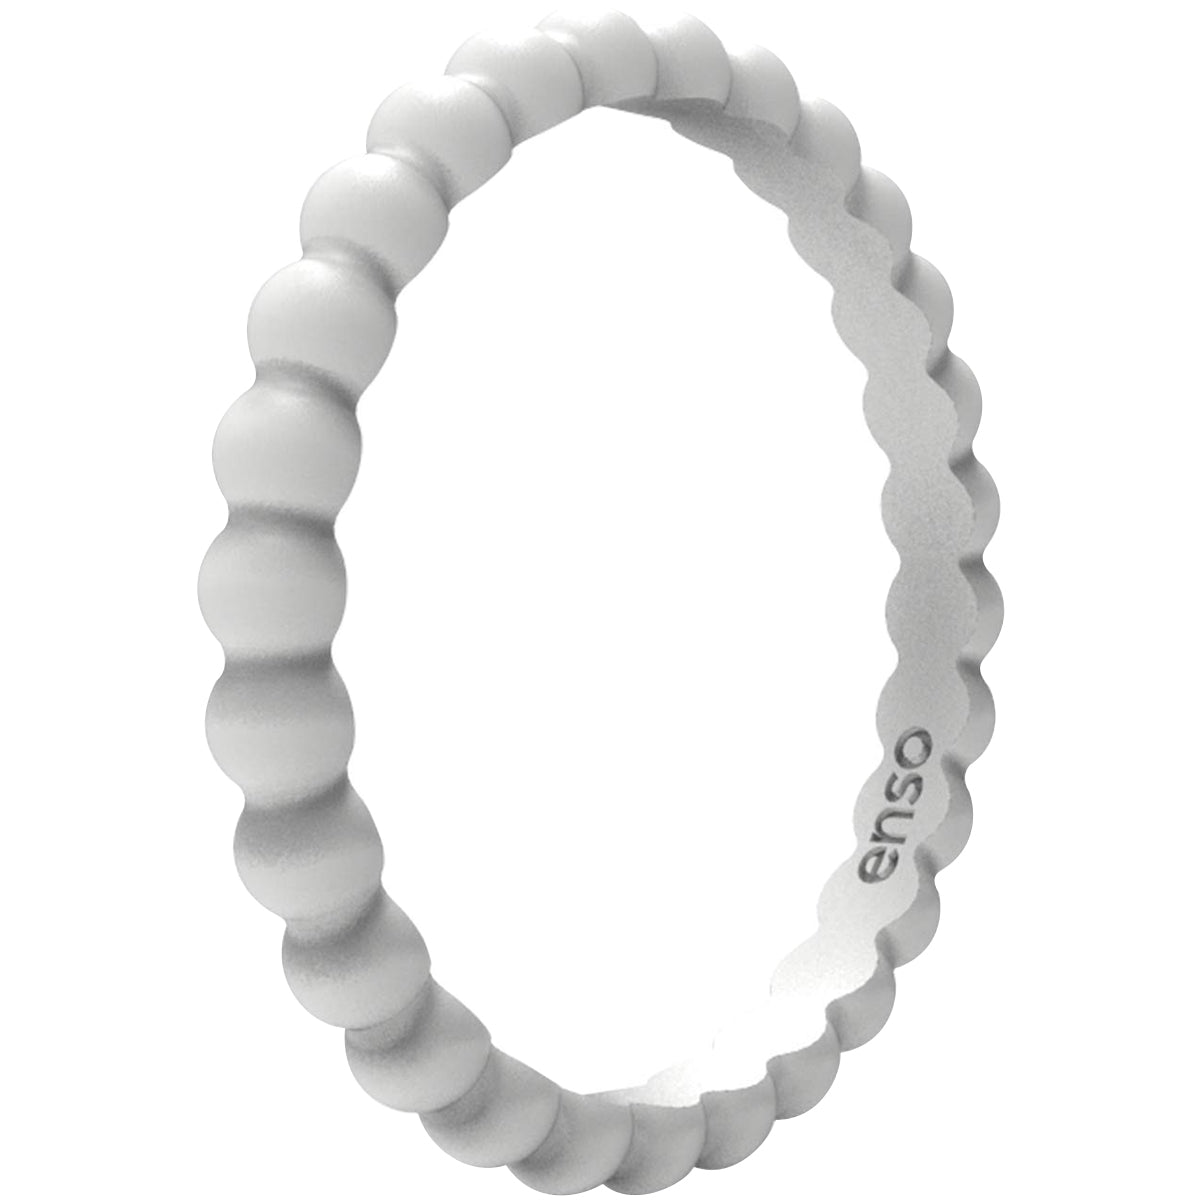 Enso Rings Beaded Stackables Series Silicone Ring - Misty Grey Enso Rings